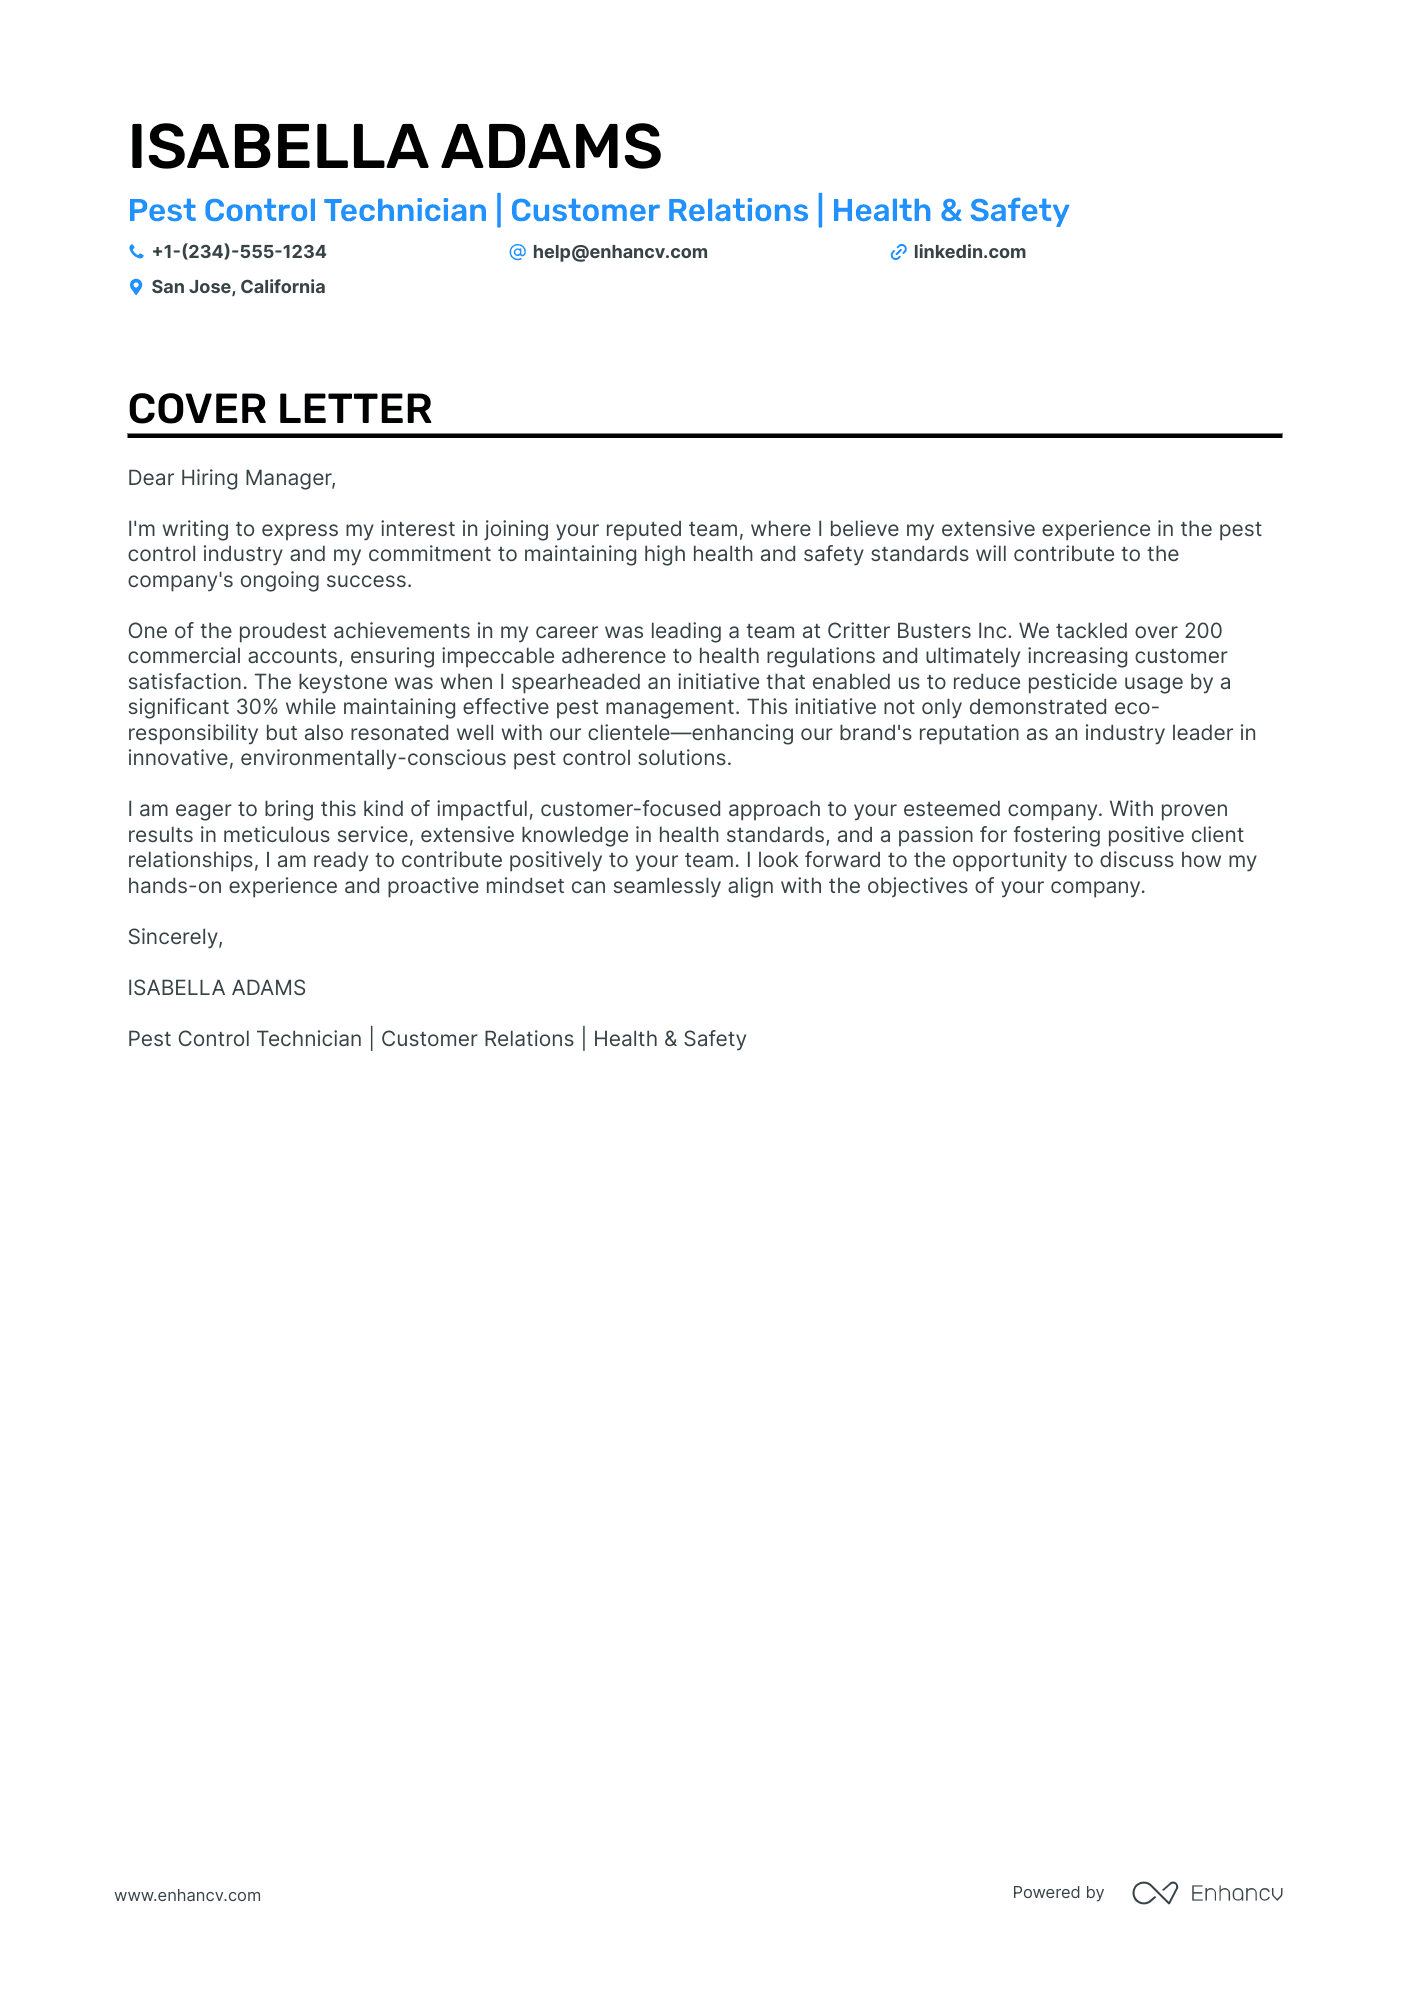 Pest Control cover letter